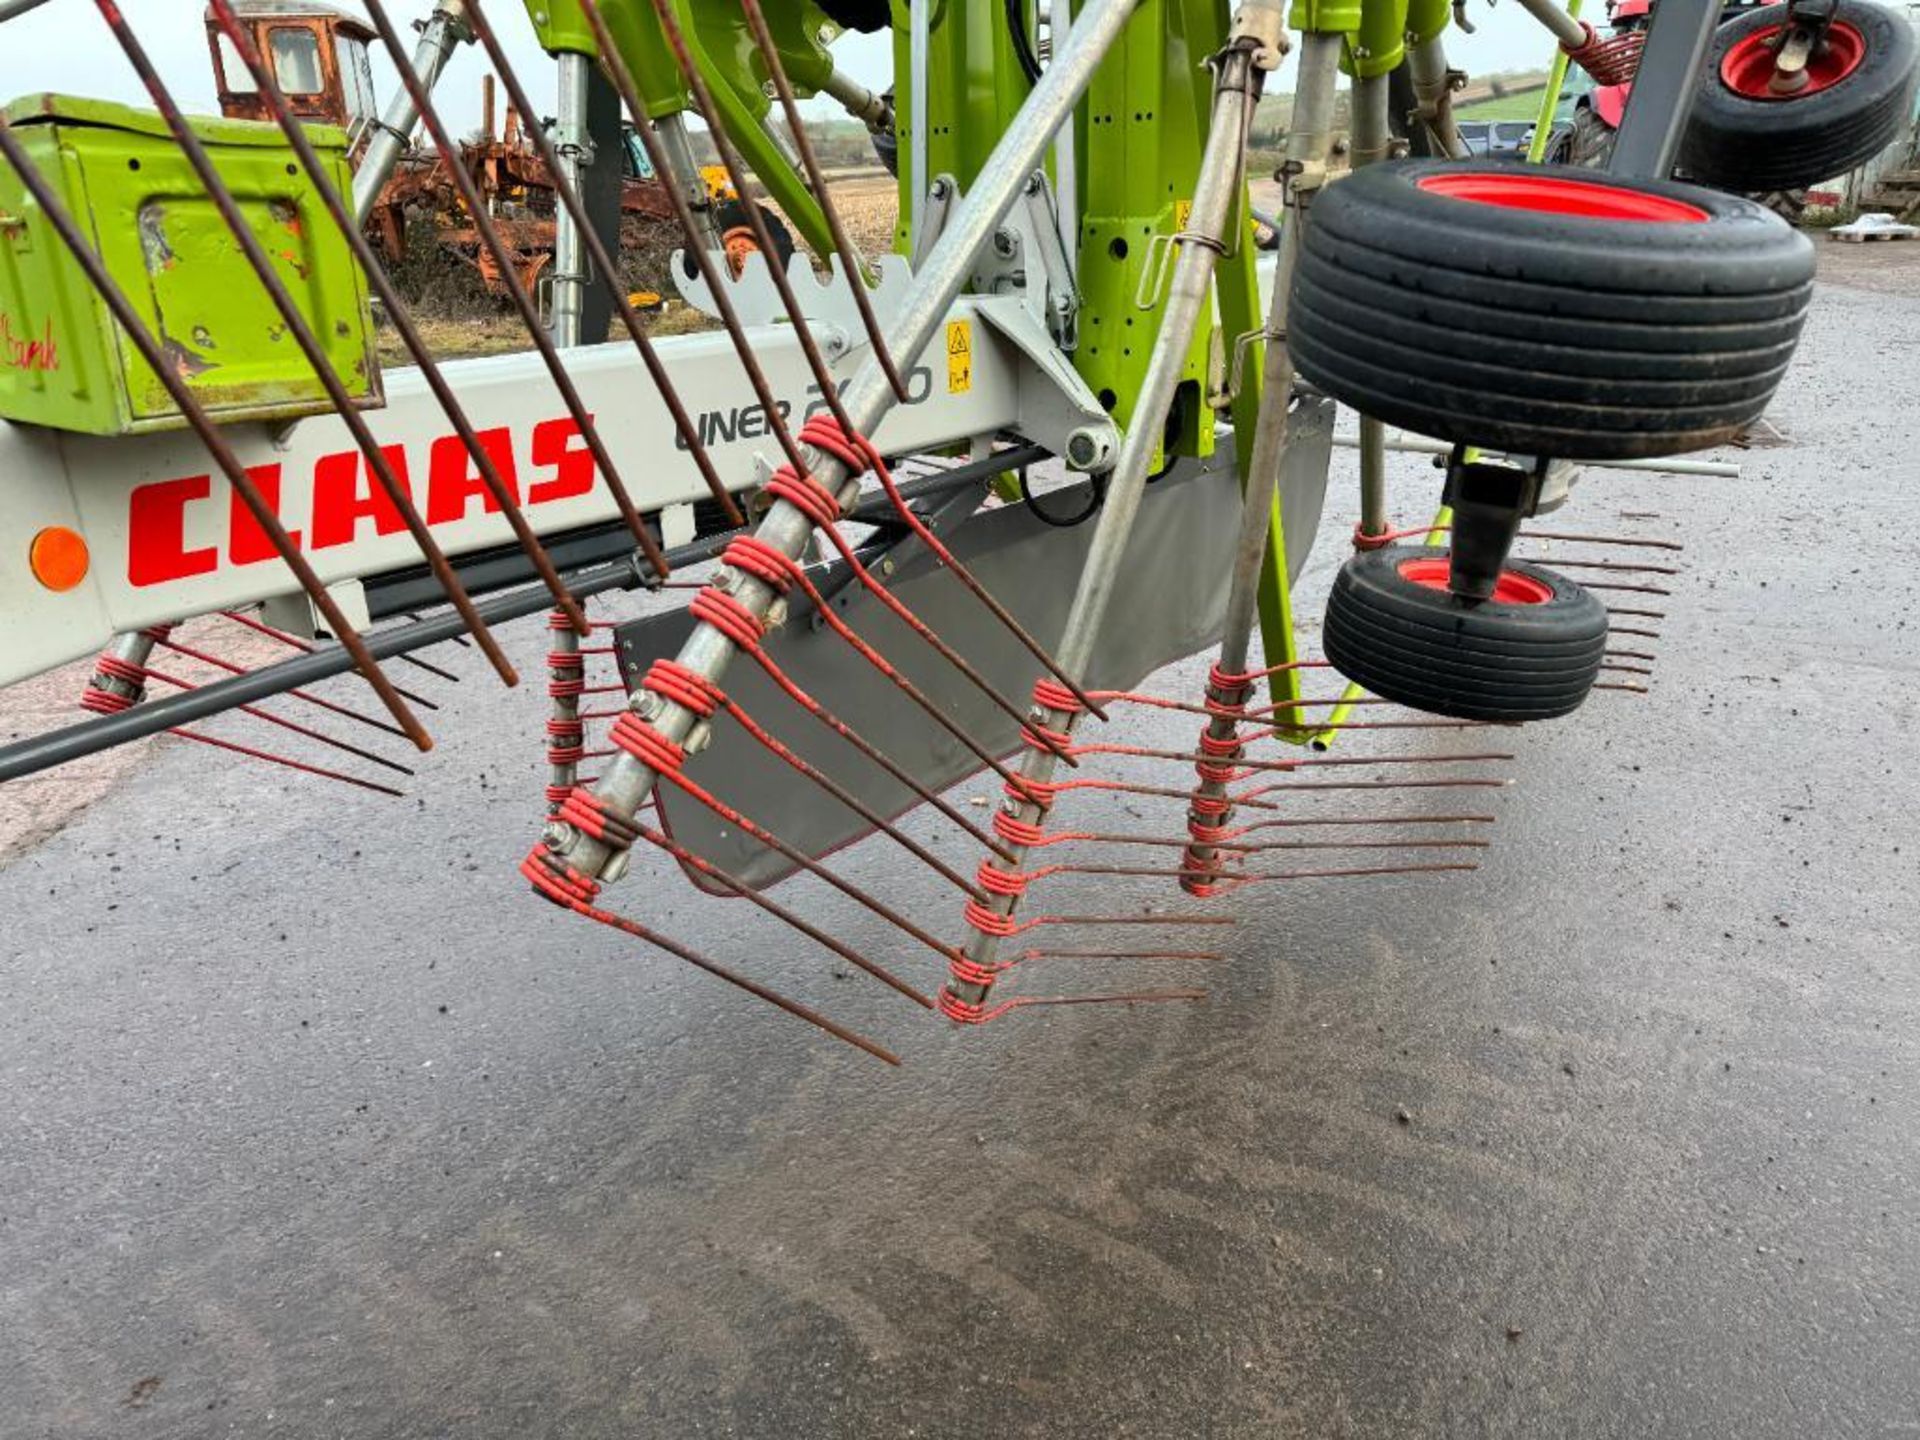 2019 Claas Liner 2900 twin rotor hydraulic folding rake on 15.0/55-17 wheels and tyres. Serial No: W - Image 7 of 14